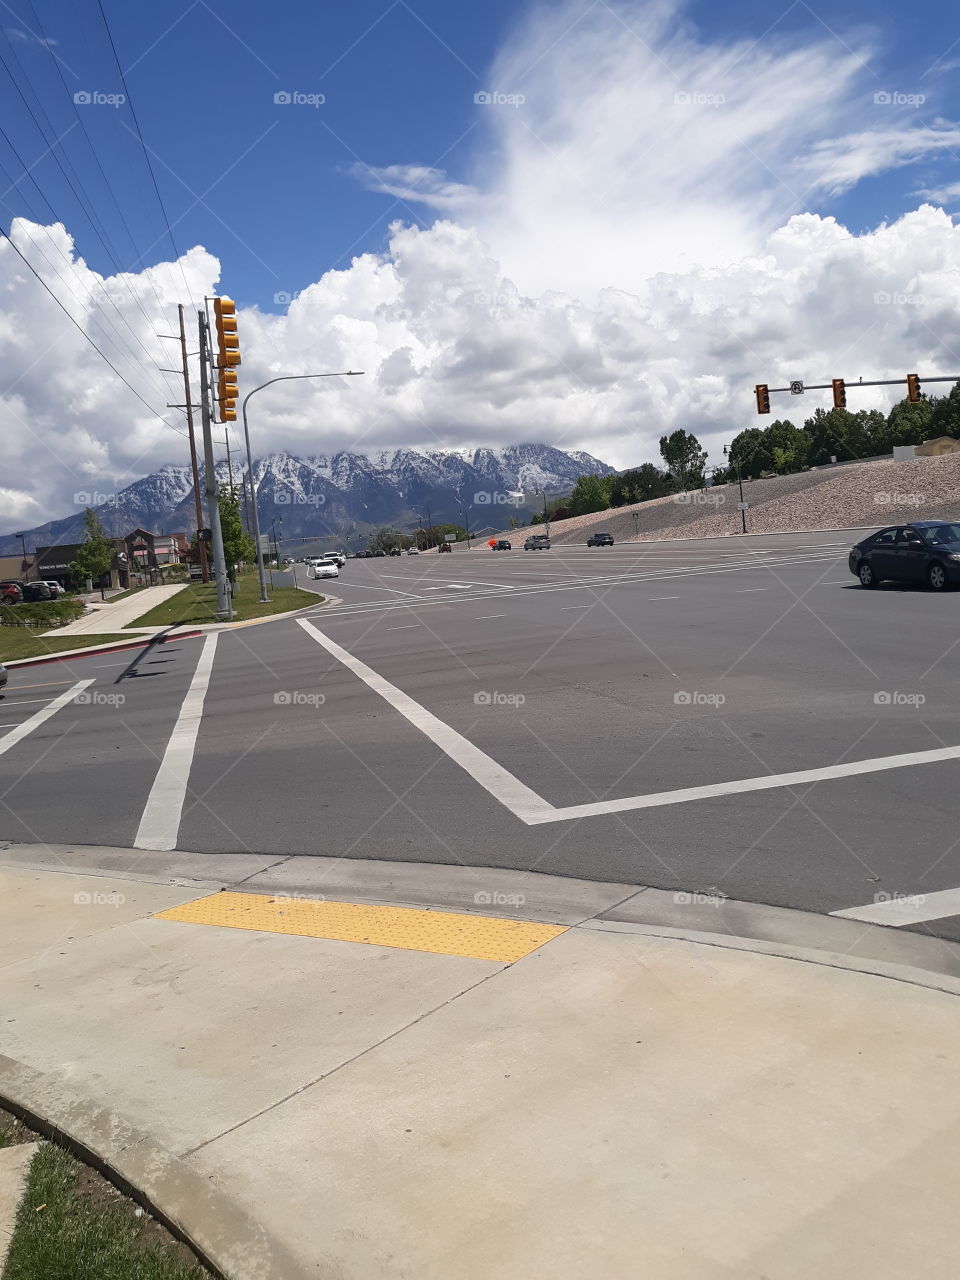 city street in Utah with a mountain backdrop